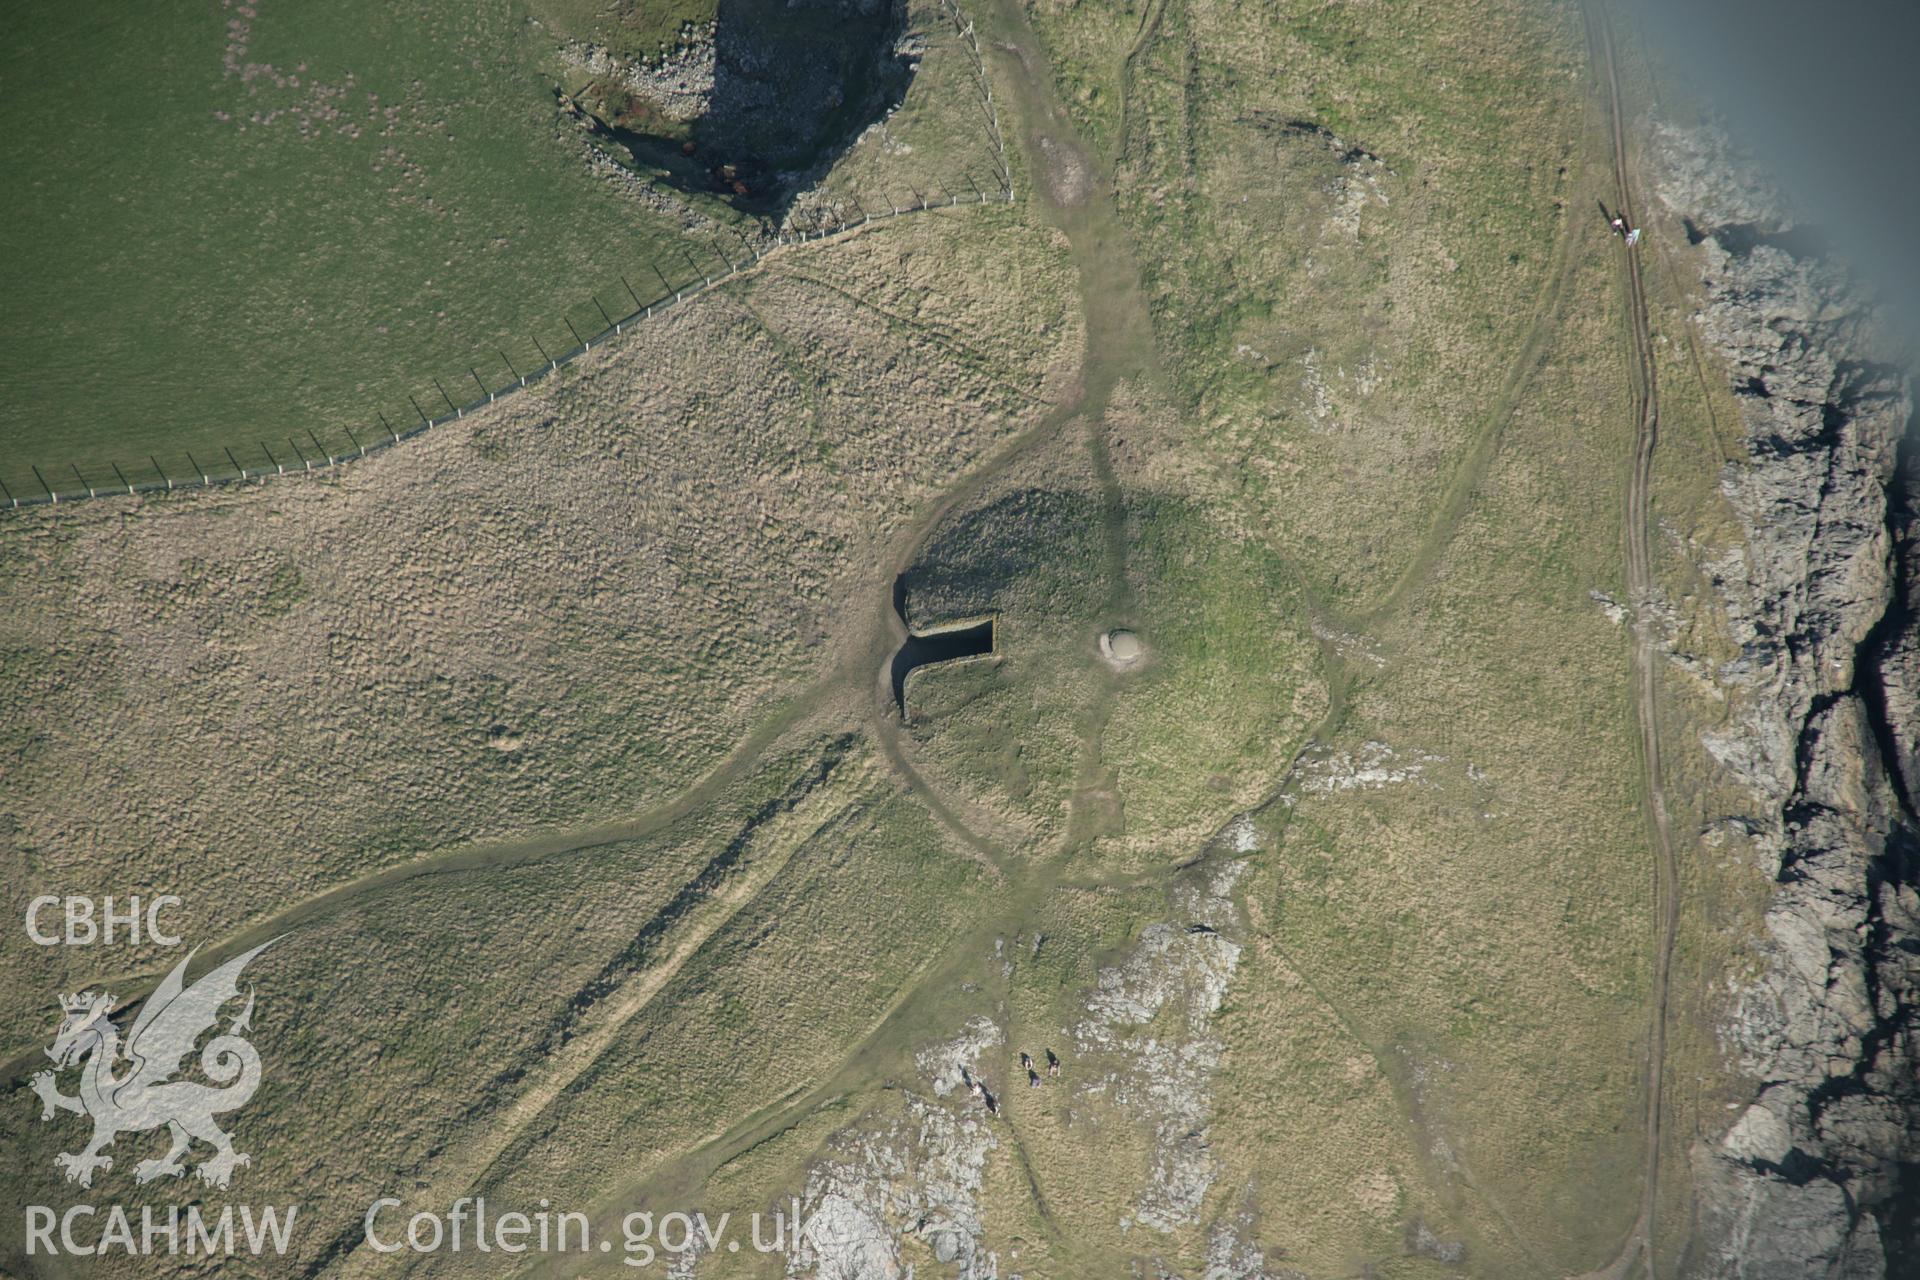 RCAHMW digital colour oblique photograph of Barclodiad-y-gawres Burial Chamber. Taken on 20/03/2005 by T.G. Driver.